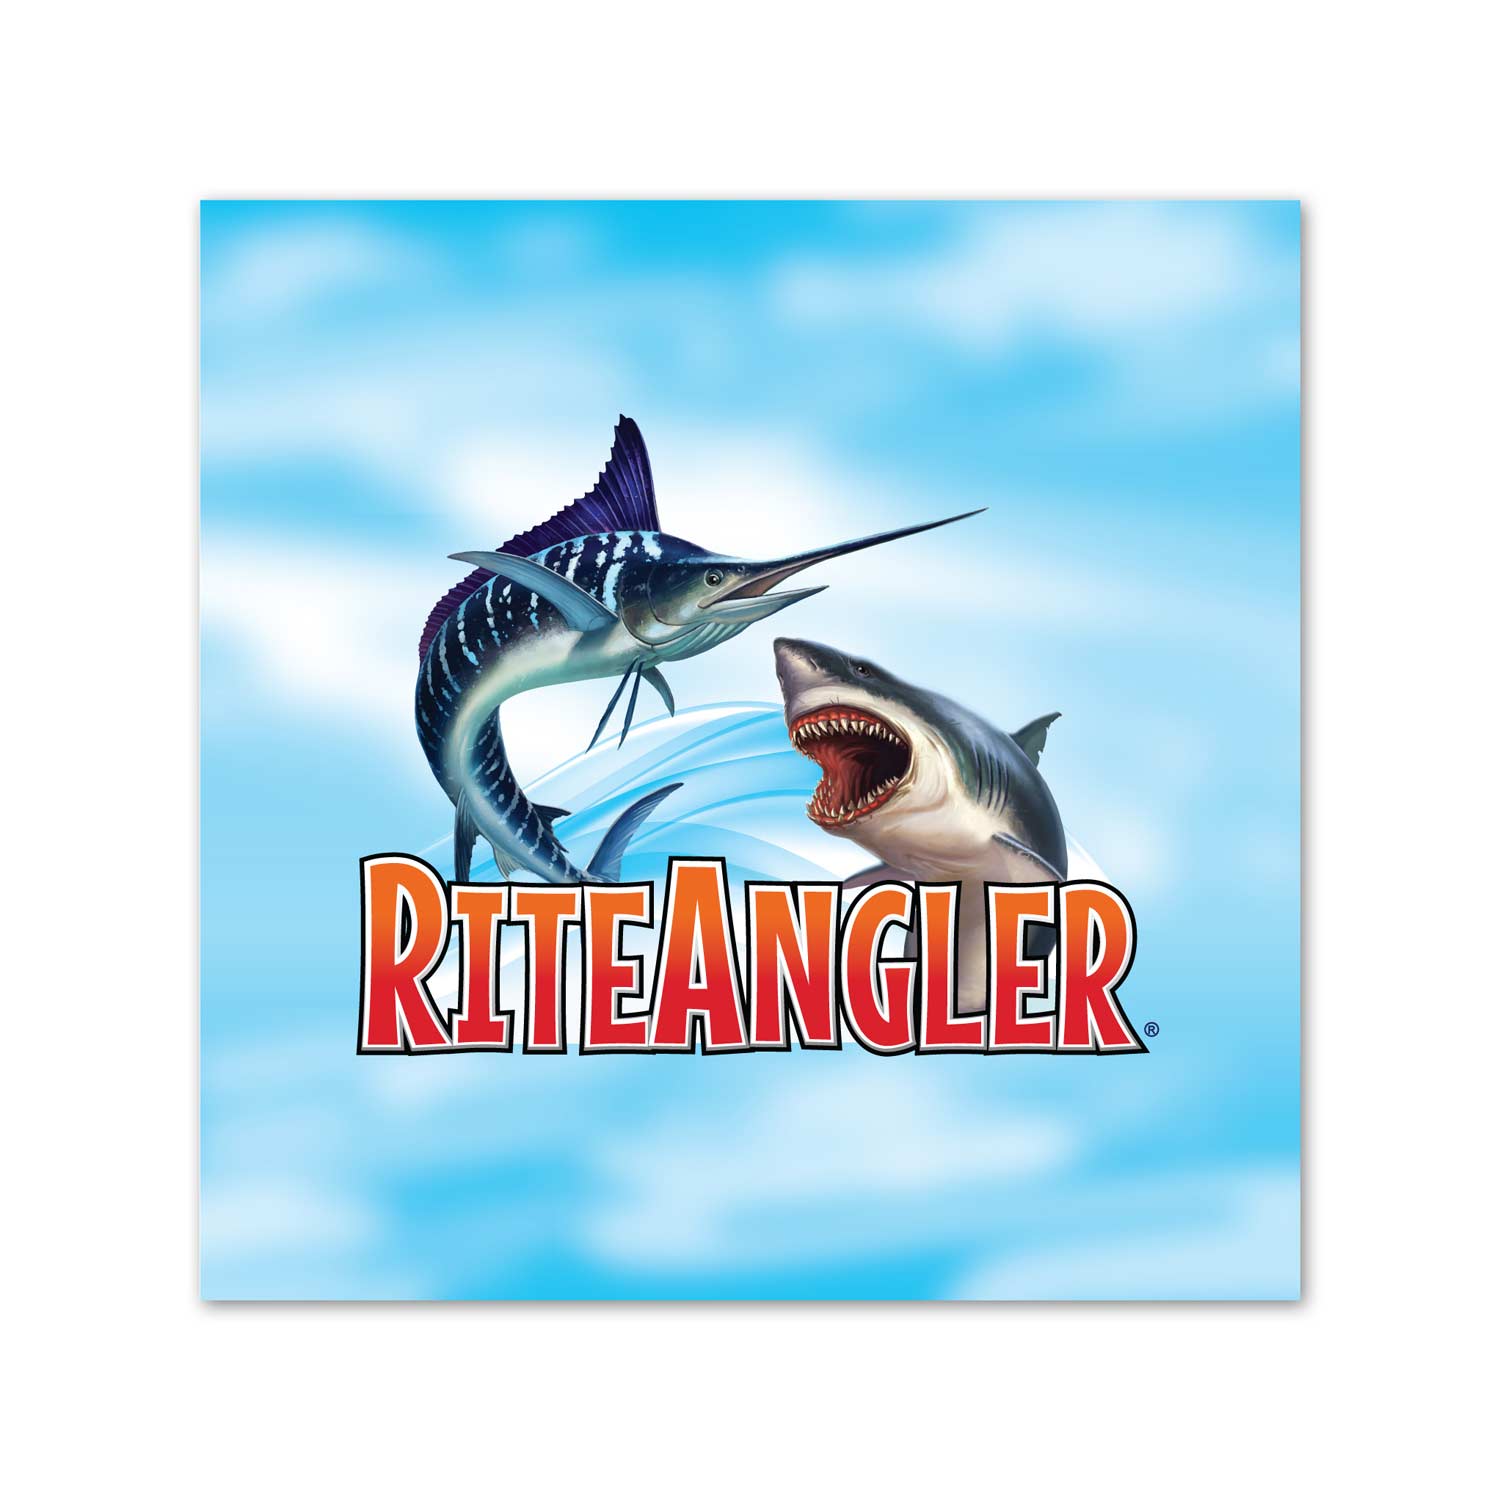 Rite Angler fishing kite with clouds